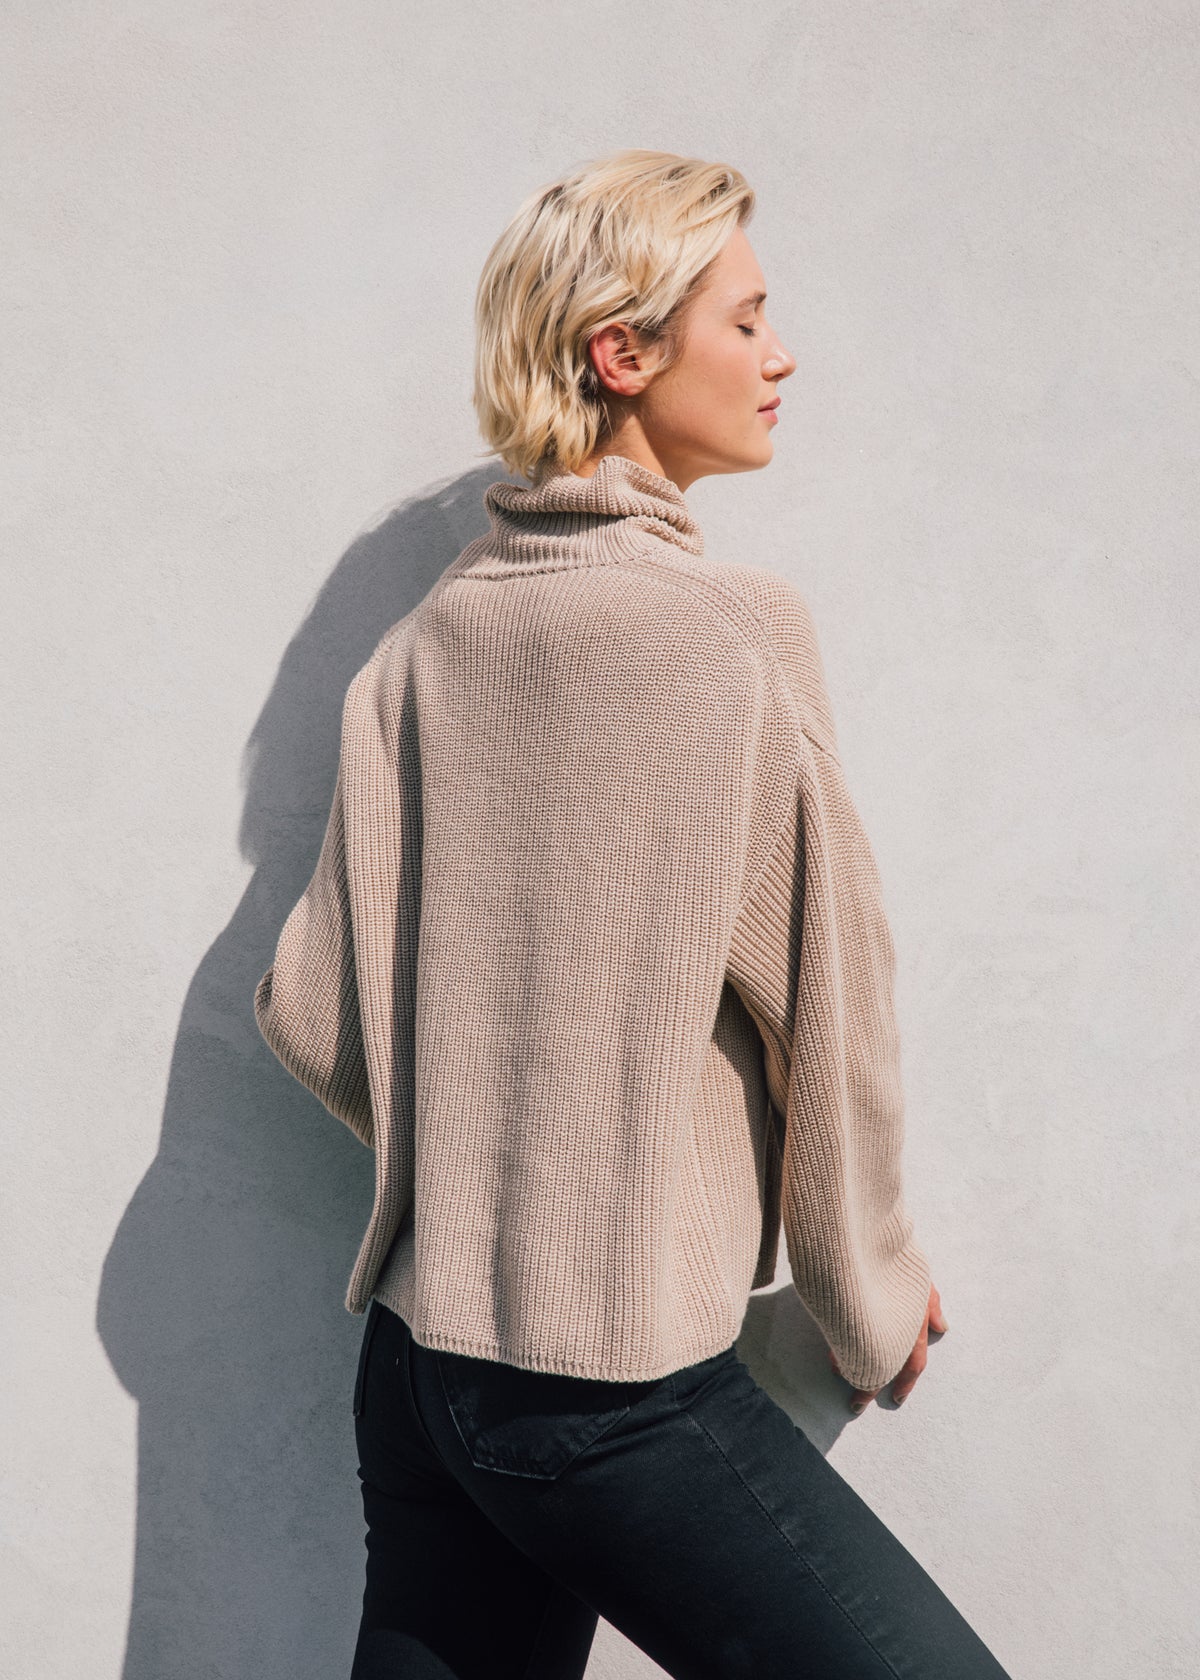 Neve Cropped Turtleneck in Oat Cotton Cashmere